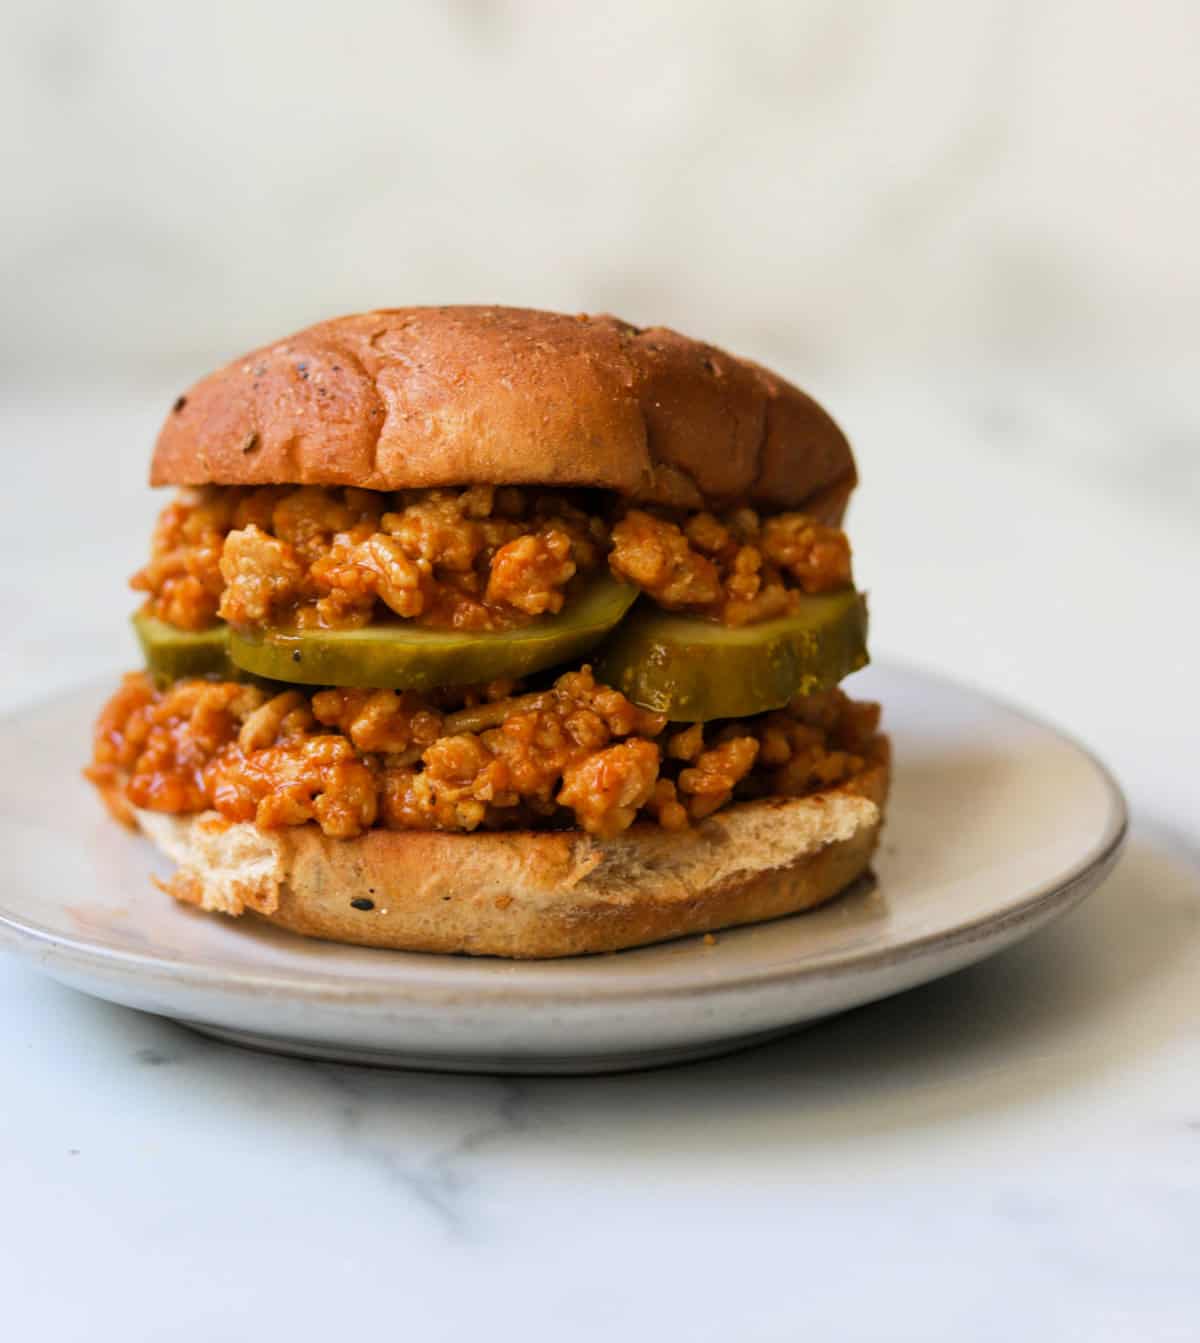 A close up shot of a sloppy joe stacked on a bun with sliced pickles.